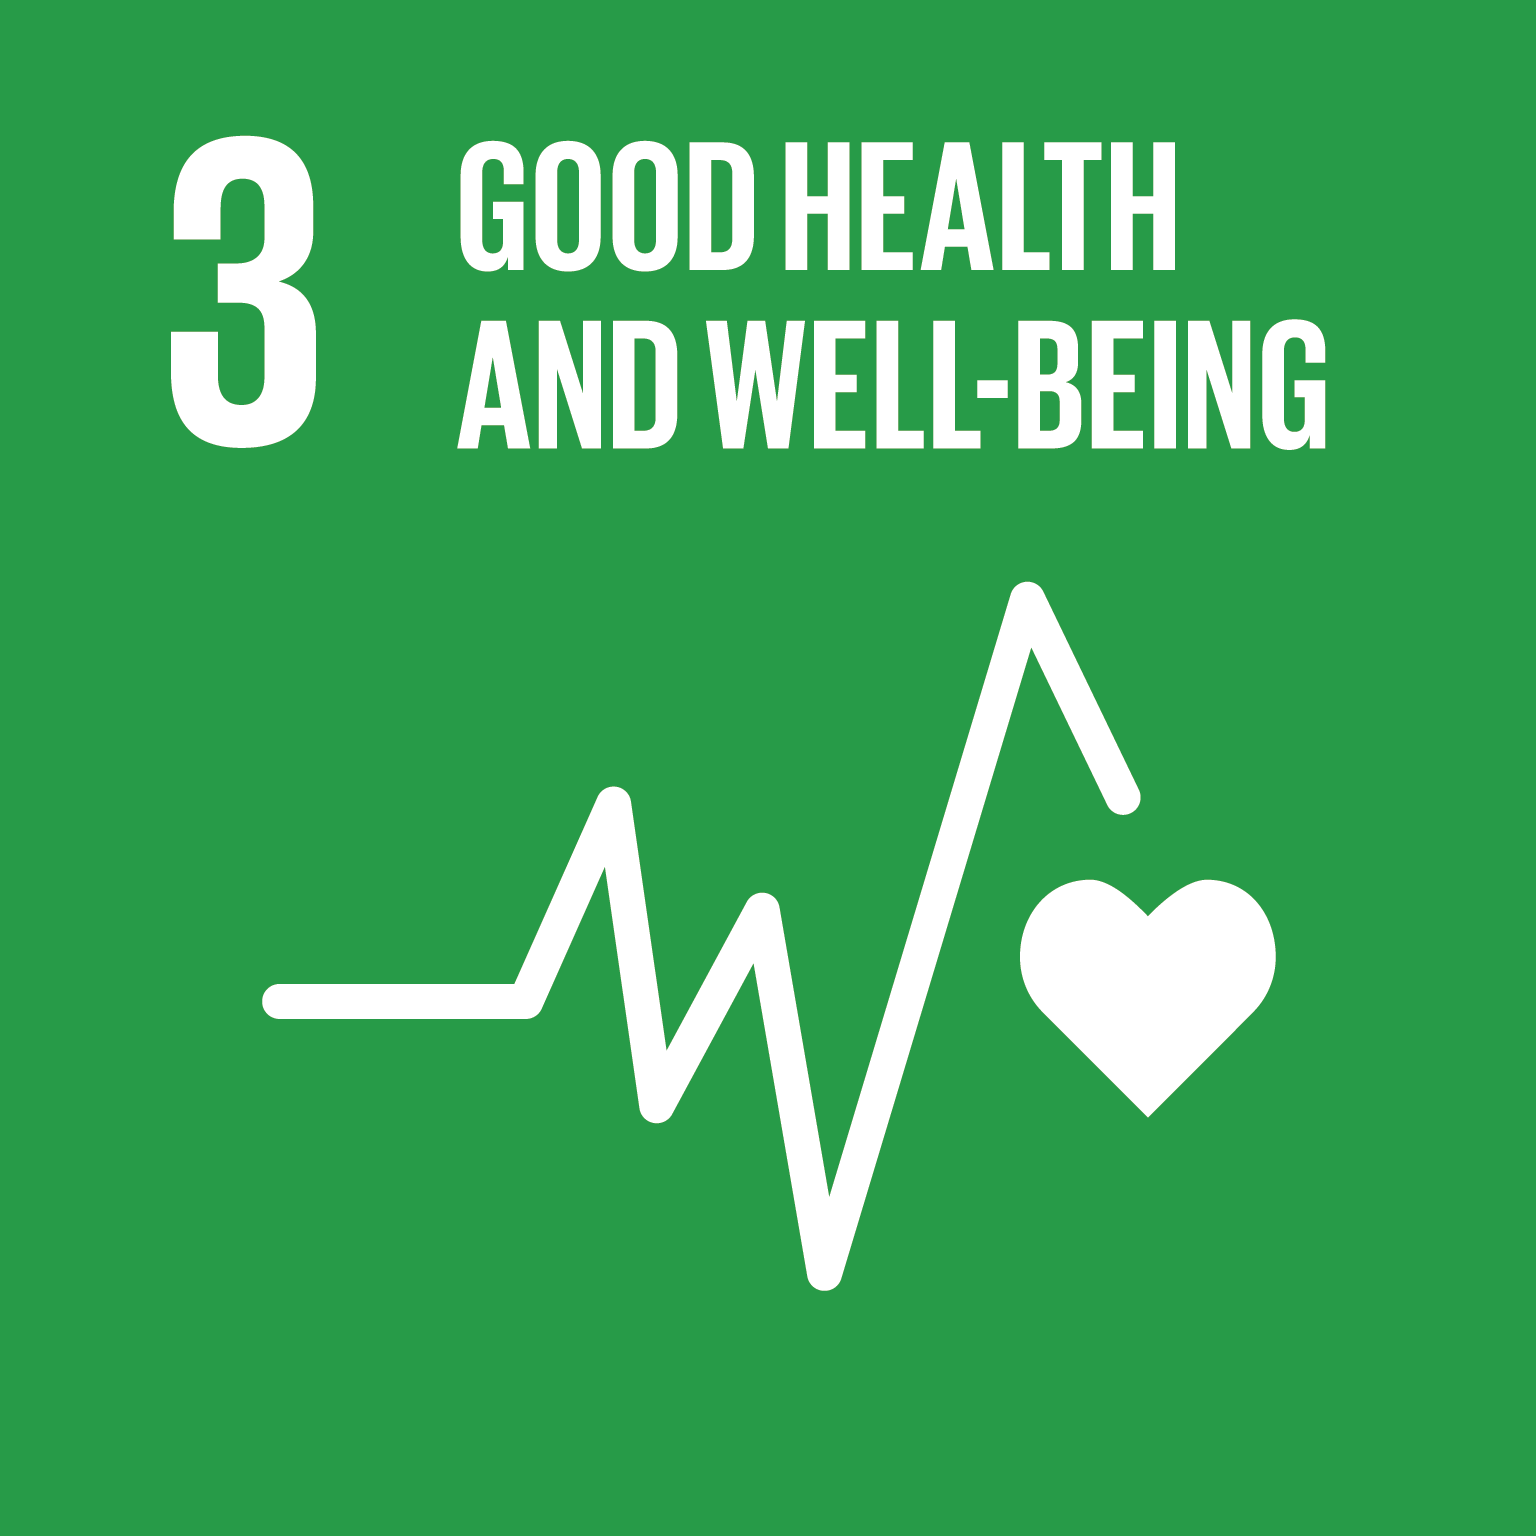 Good Health and Well-Being: Sustainable Development Goal 3